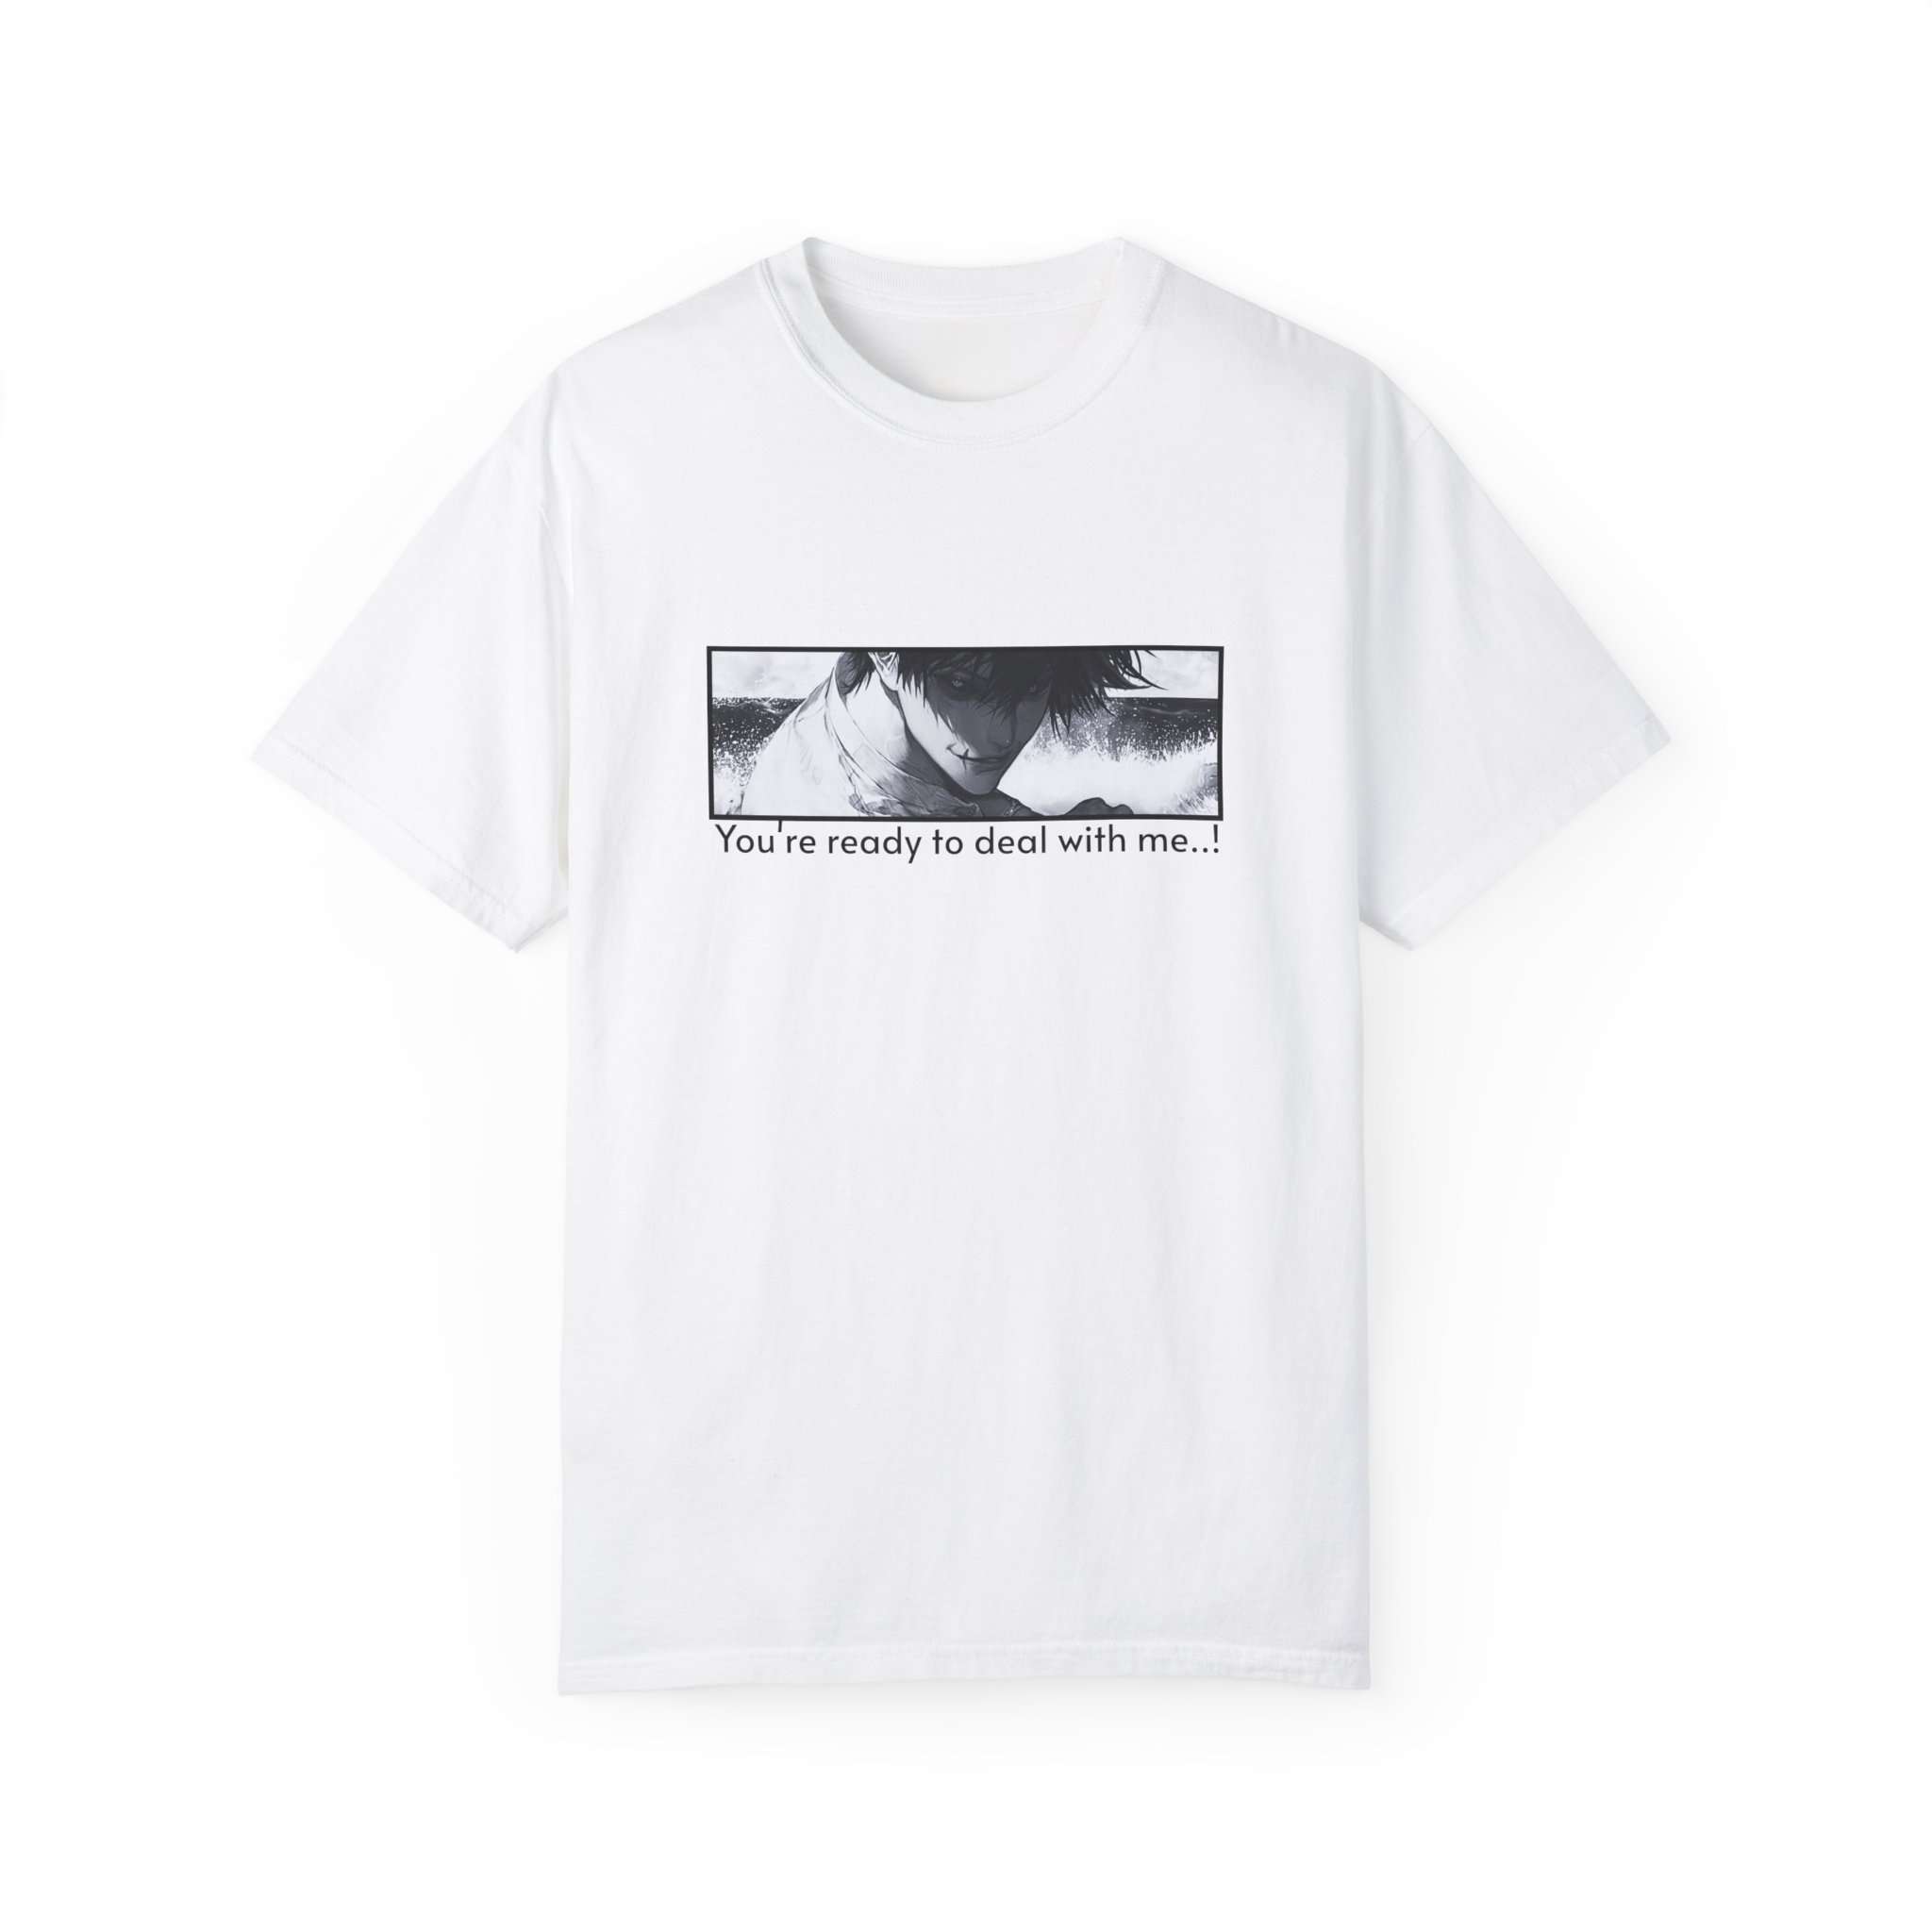 Toji Fushiguro Character Unisex Garment-Dyed T-shirt with 'You're Ready to Deal with Me' Quote